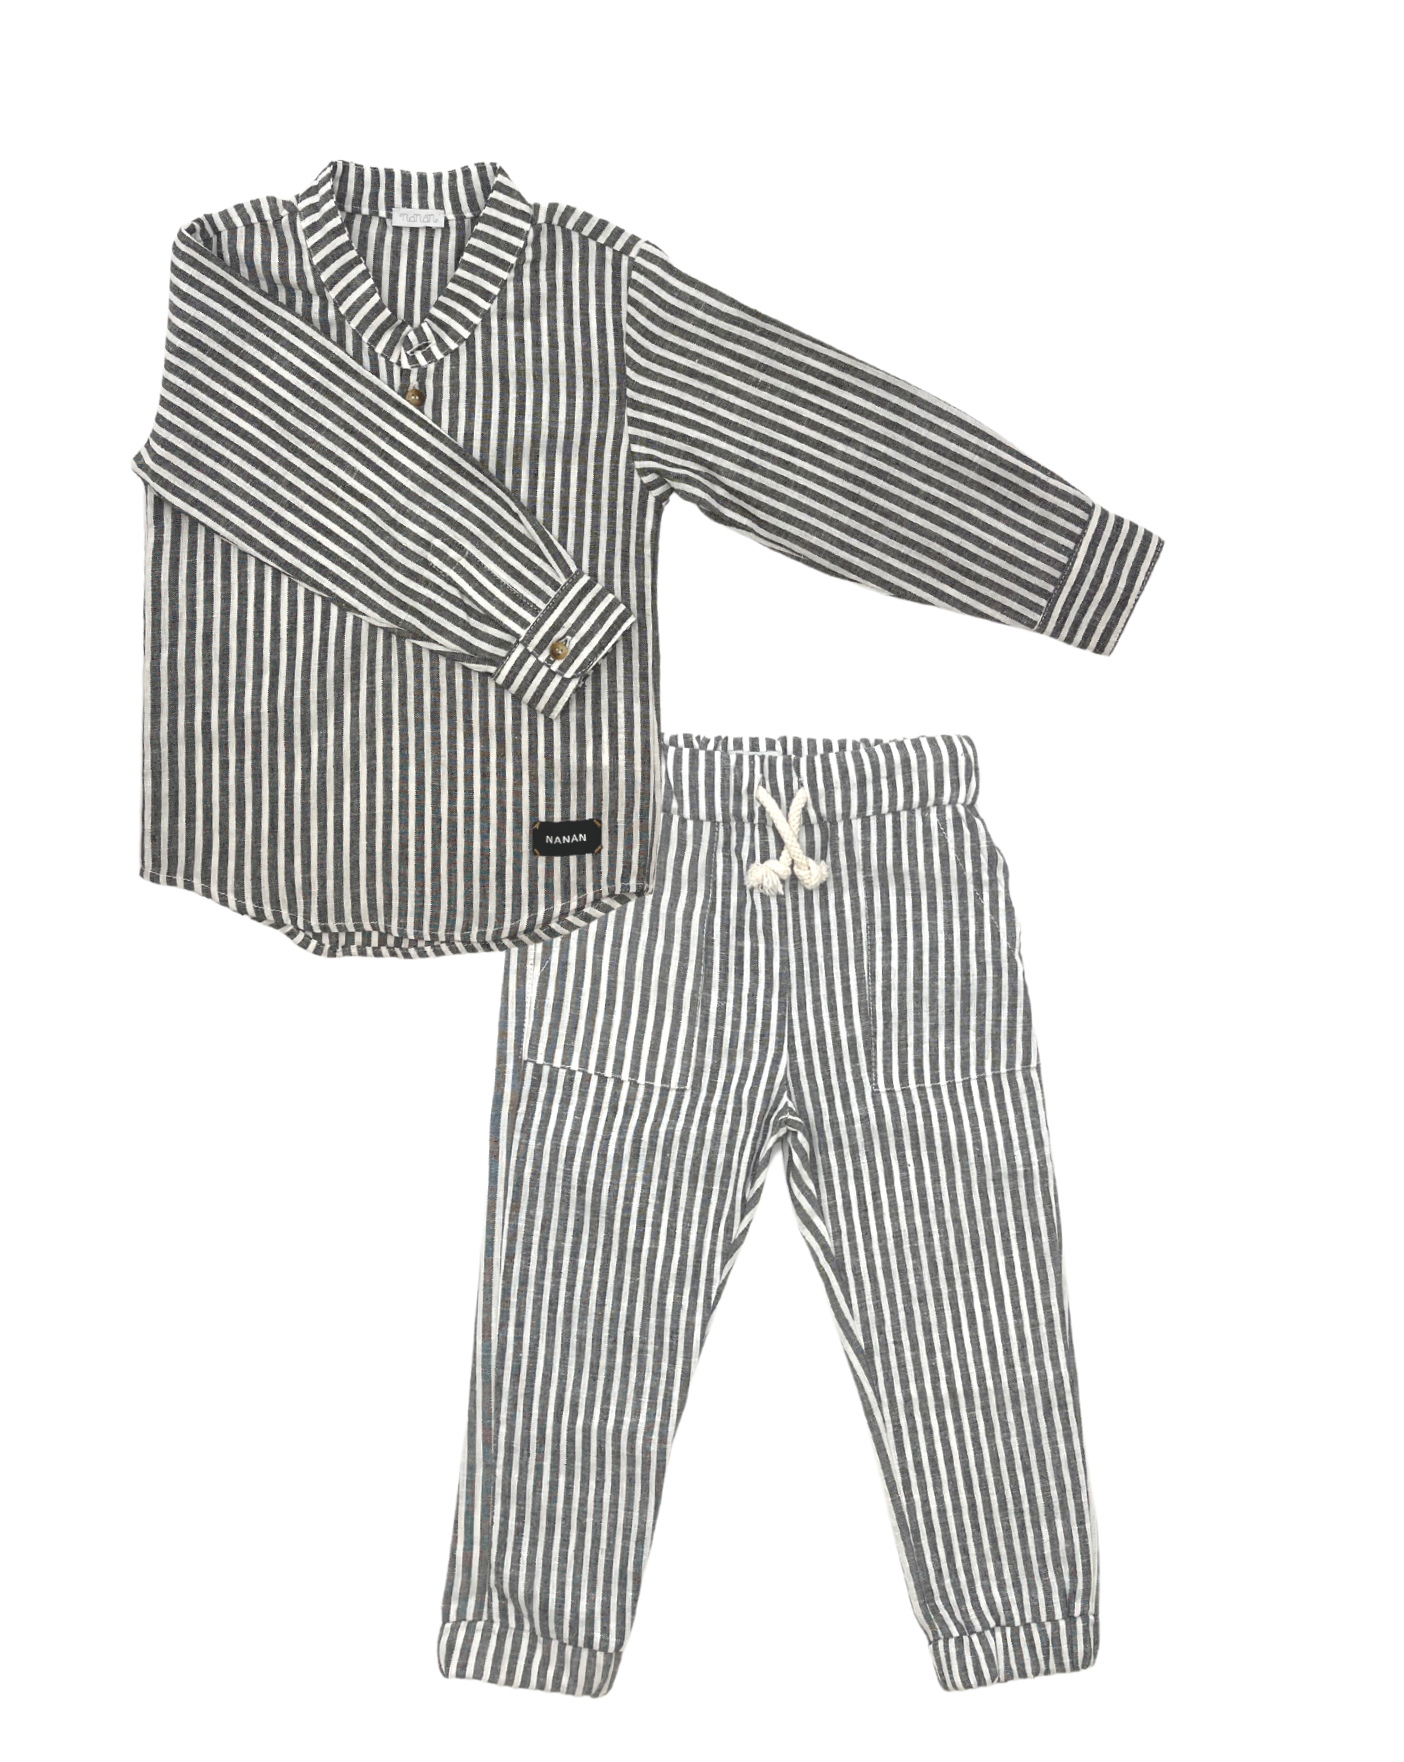 NANAN - Gray &amp; white striped linen outfit - 2 years old